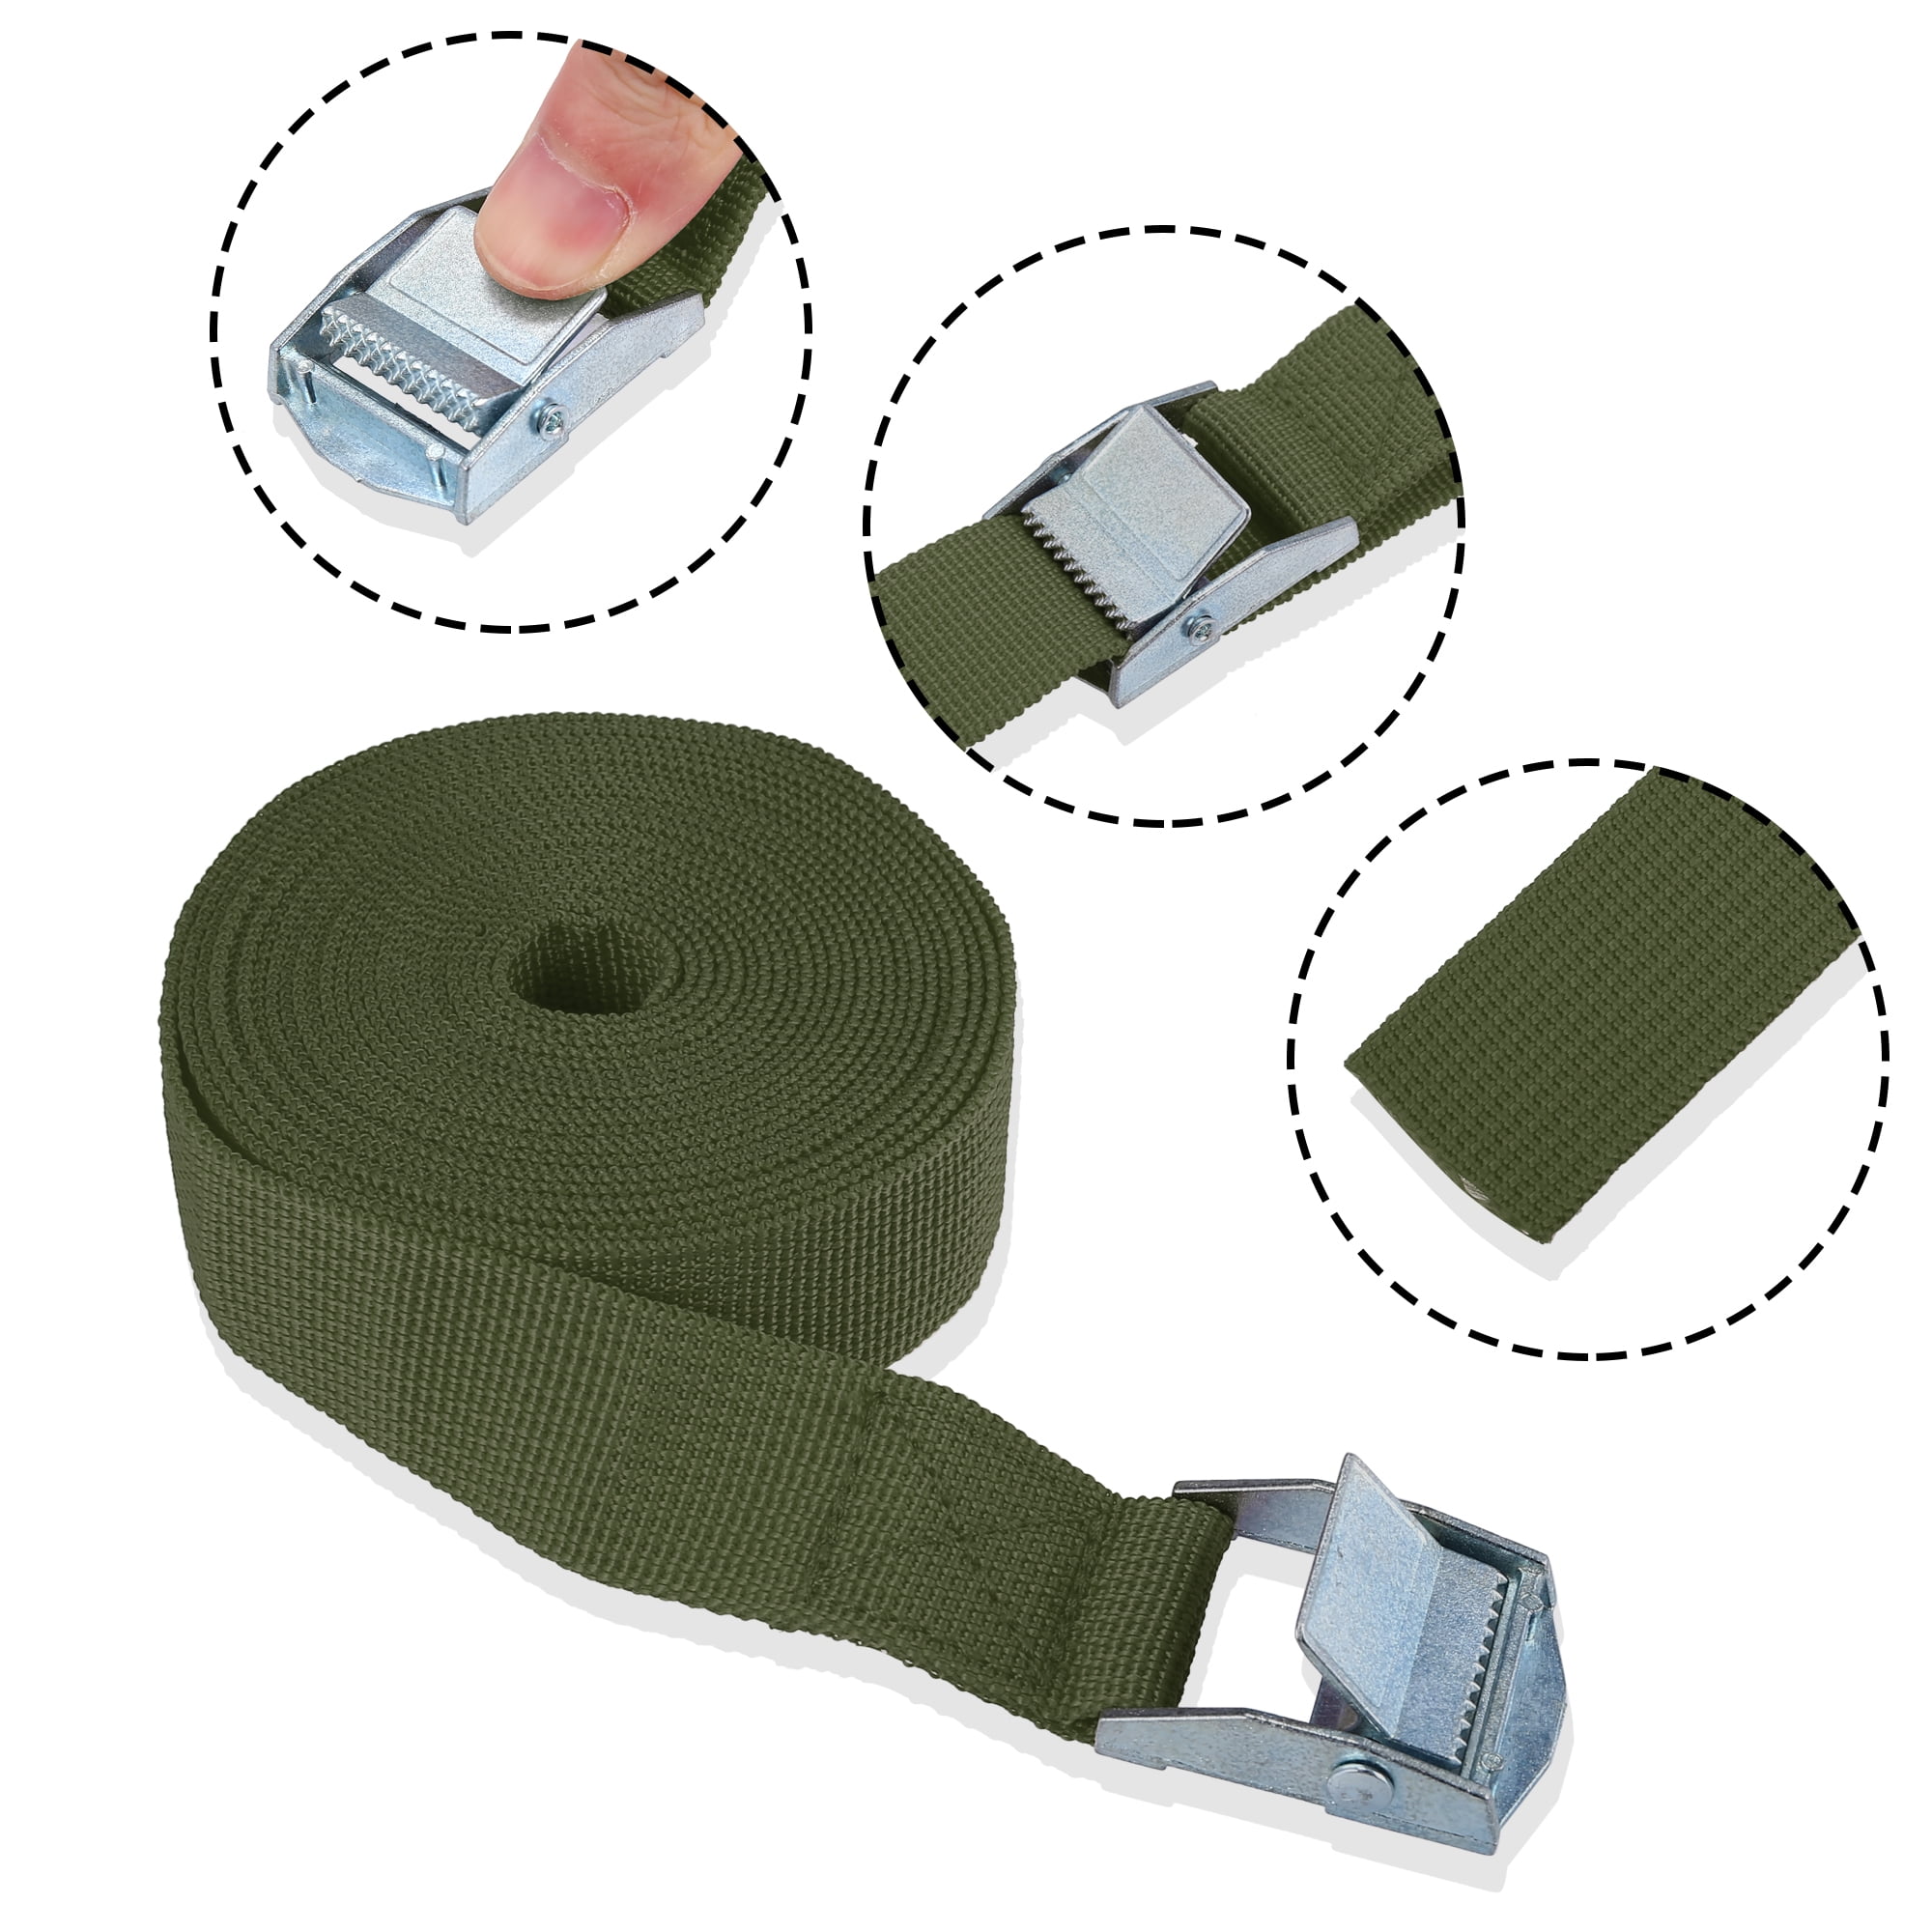 Two x 2.5 metre Cam Buckle Lashing/Tie Down Straps for Carriers Luggage  Cargo only £6.50